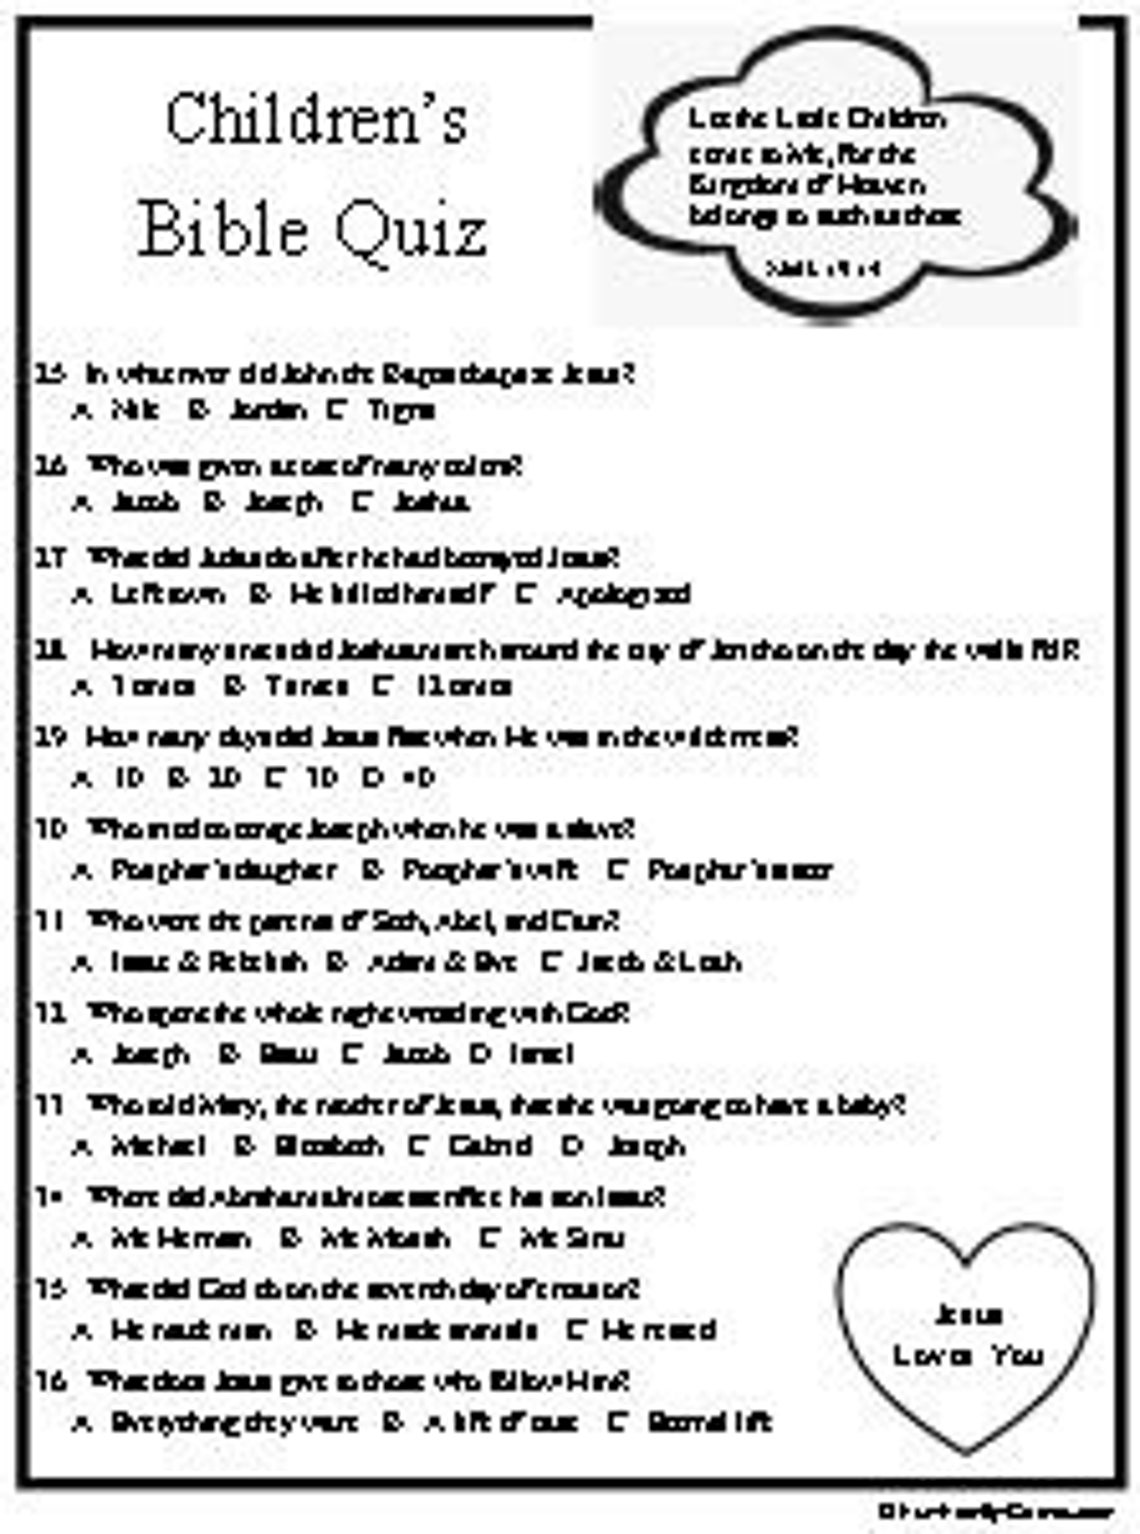 Childrens Bible Quiz Is A Multiple Choice Quiz With Chapter And Verse